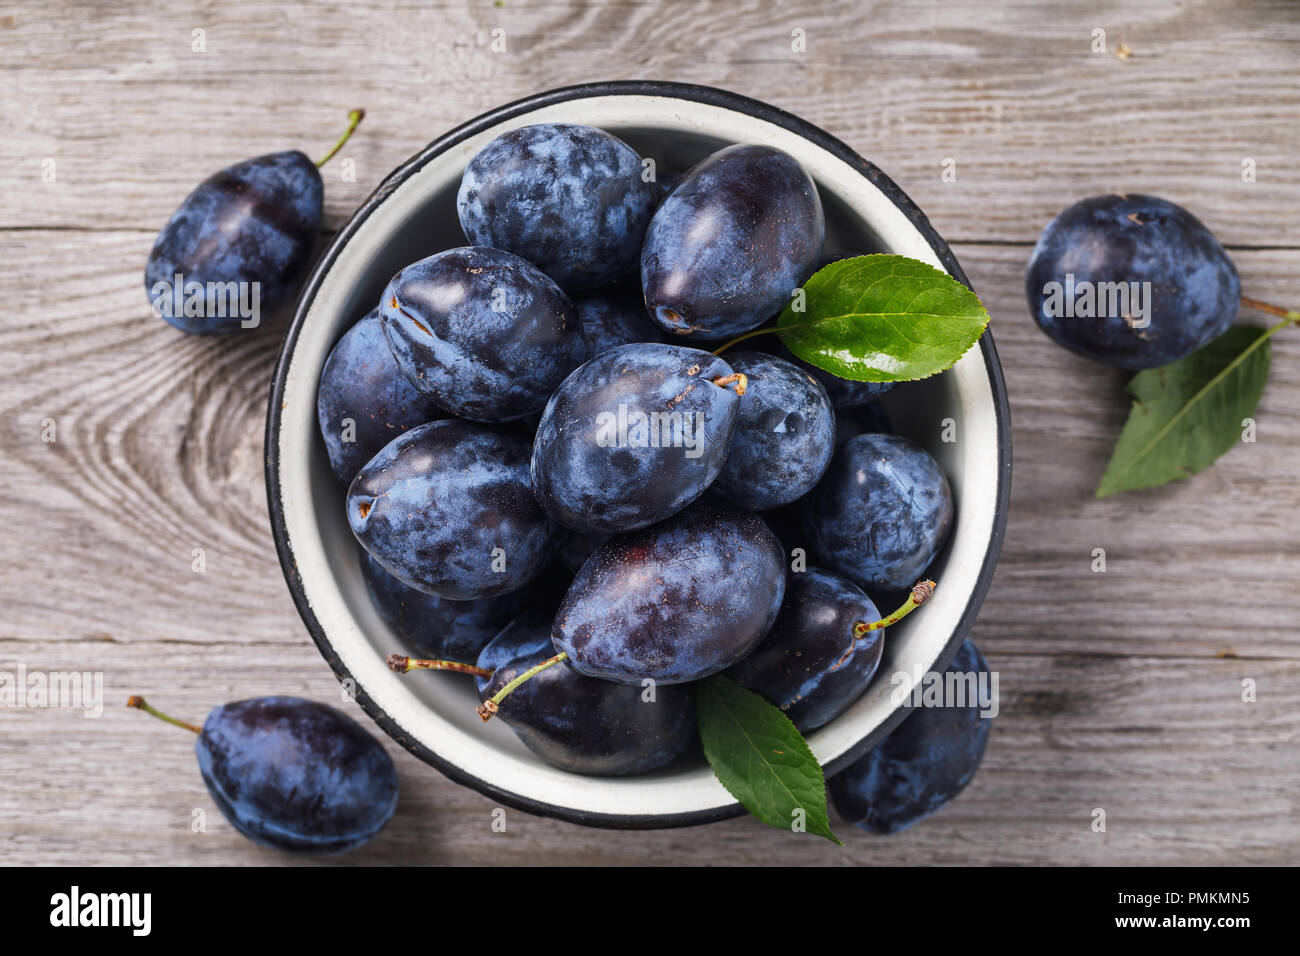 Metal bowl full of ripe prune fruit on a wooden table, top view Stock Photo